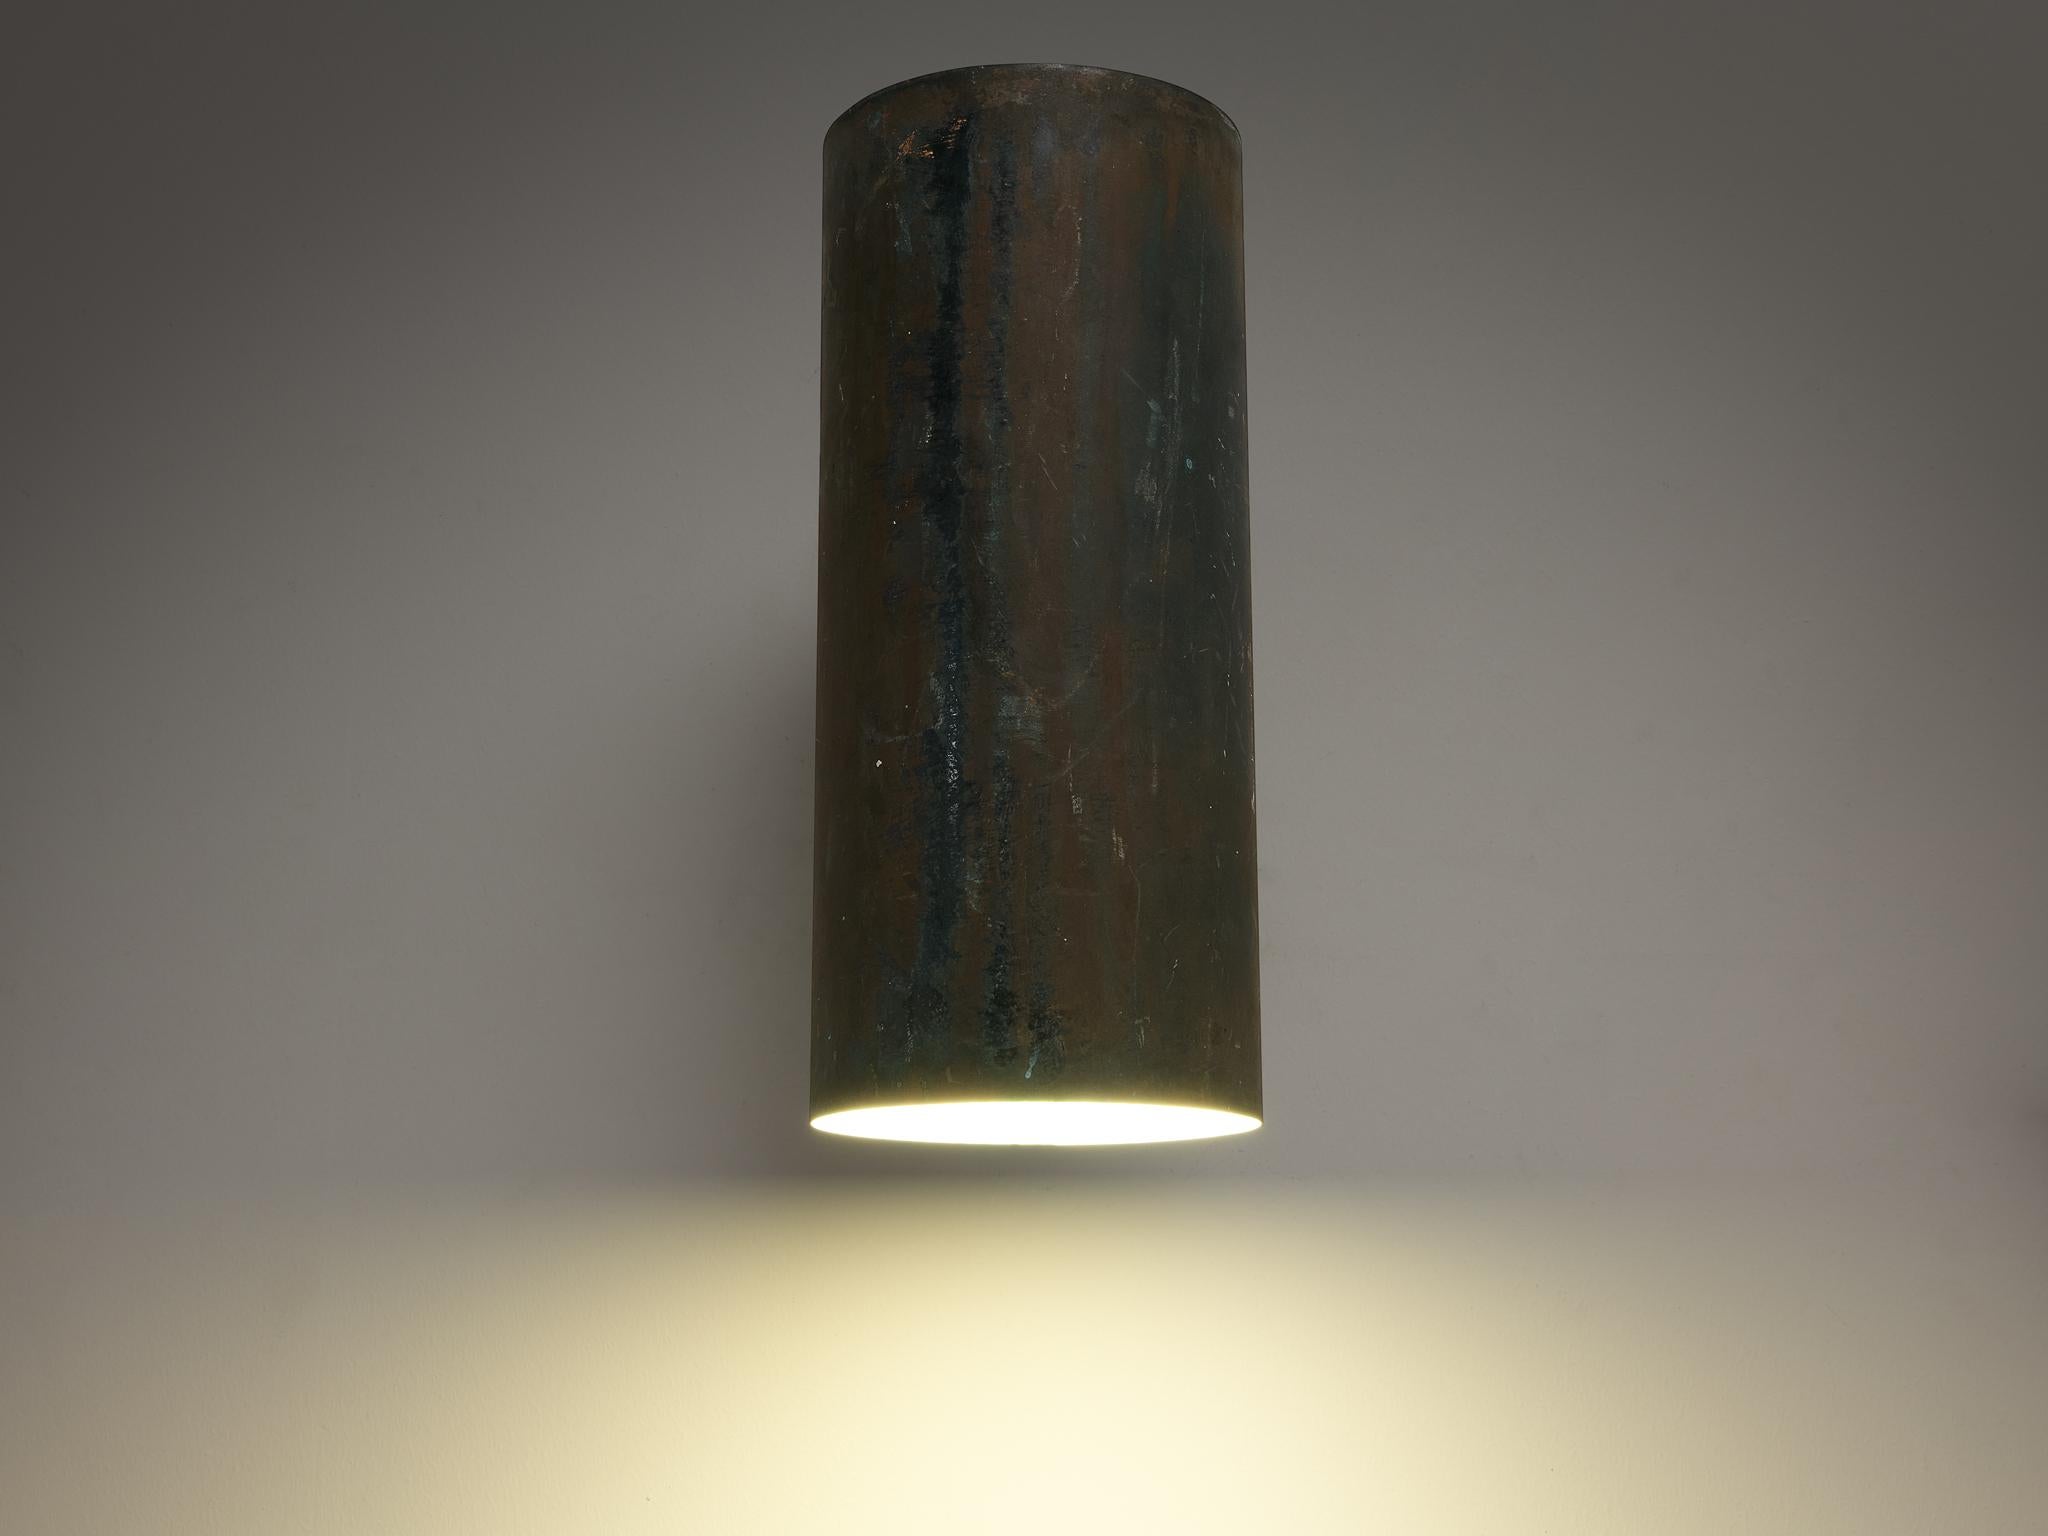 Hans-Agne Jakobsson for Hans-Agne Jakobsson AB in Markaryd, ‘Rulle’ wall light, copper, Sweden, 1960s.

The ‘Rulle’ outdoor light by Swedish designer Hans-Agne Jakobsson features a cylindric lampshade that is connected to a circular fixation. The